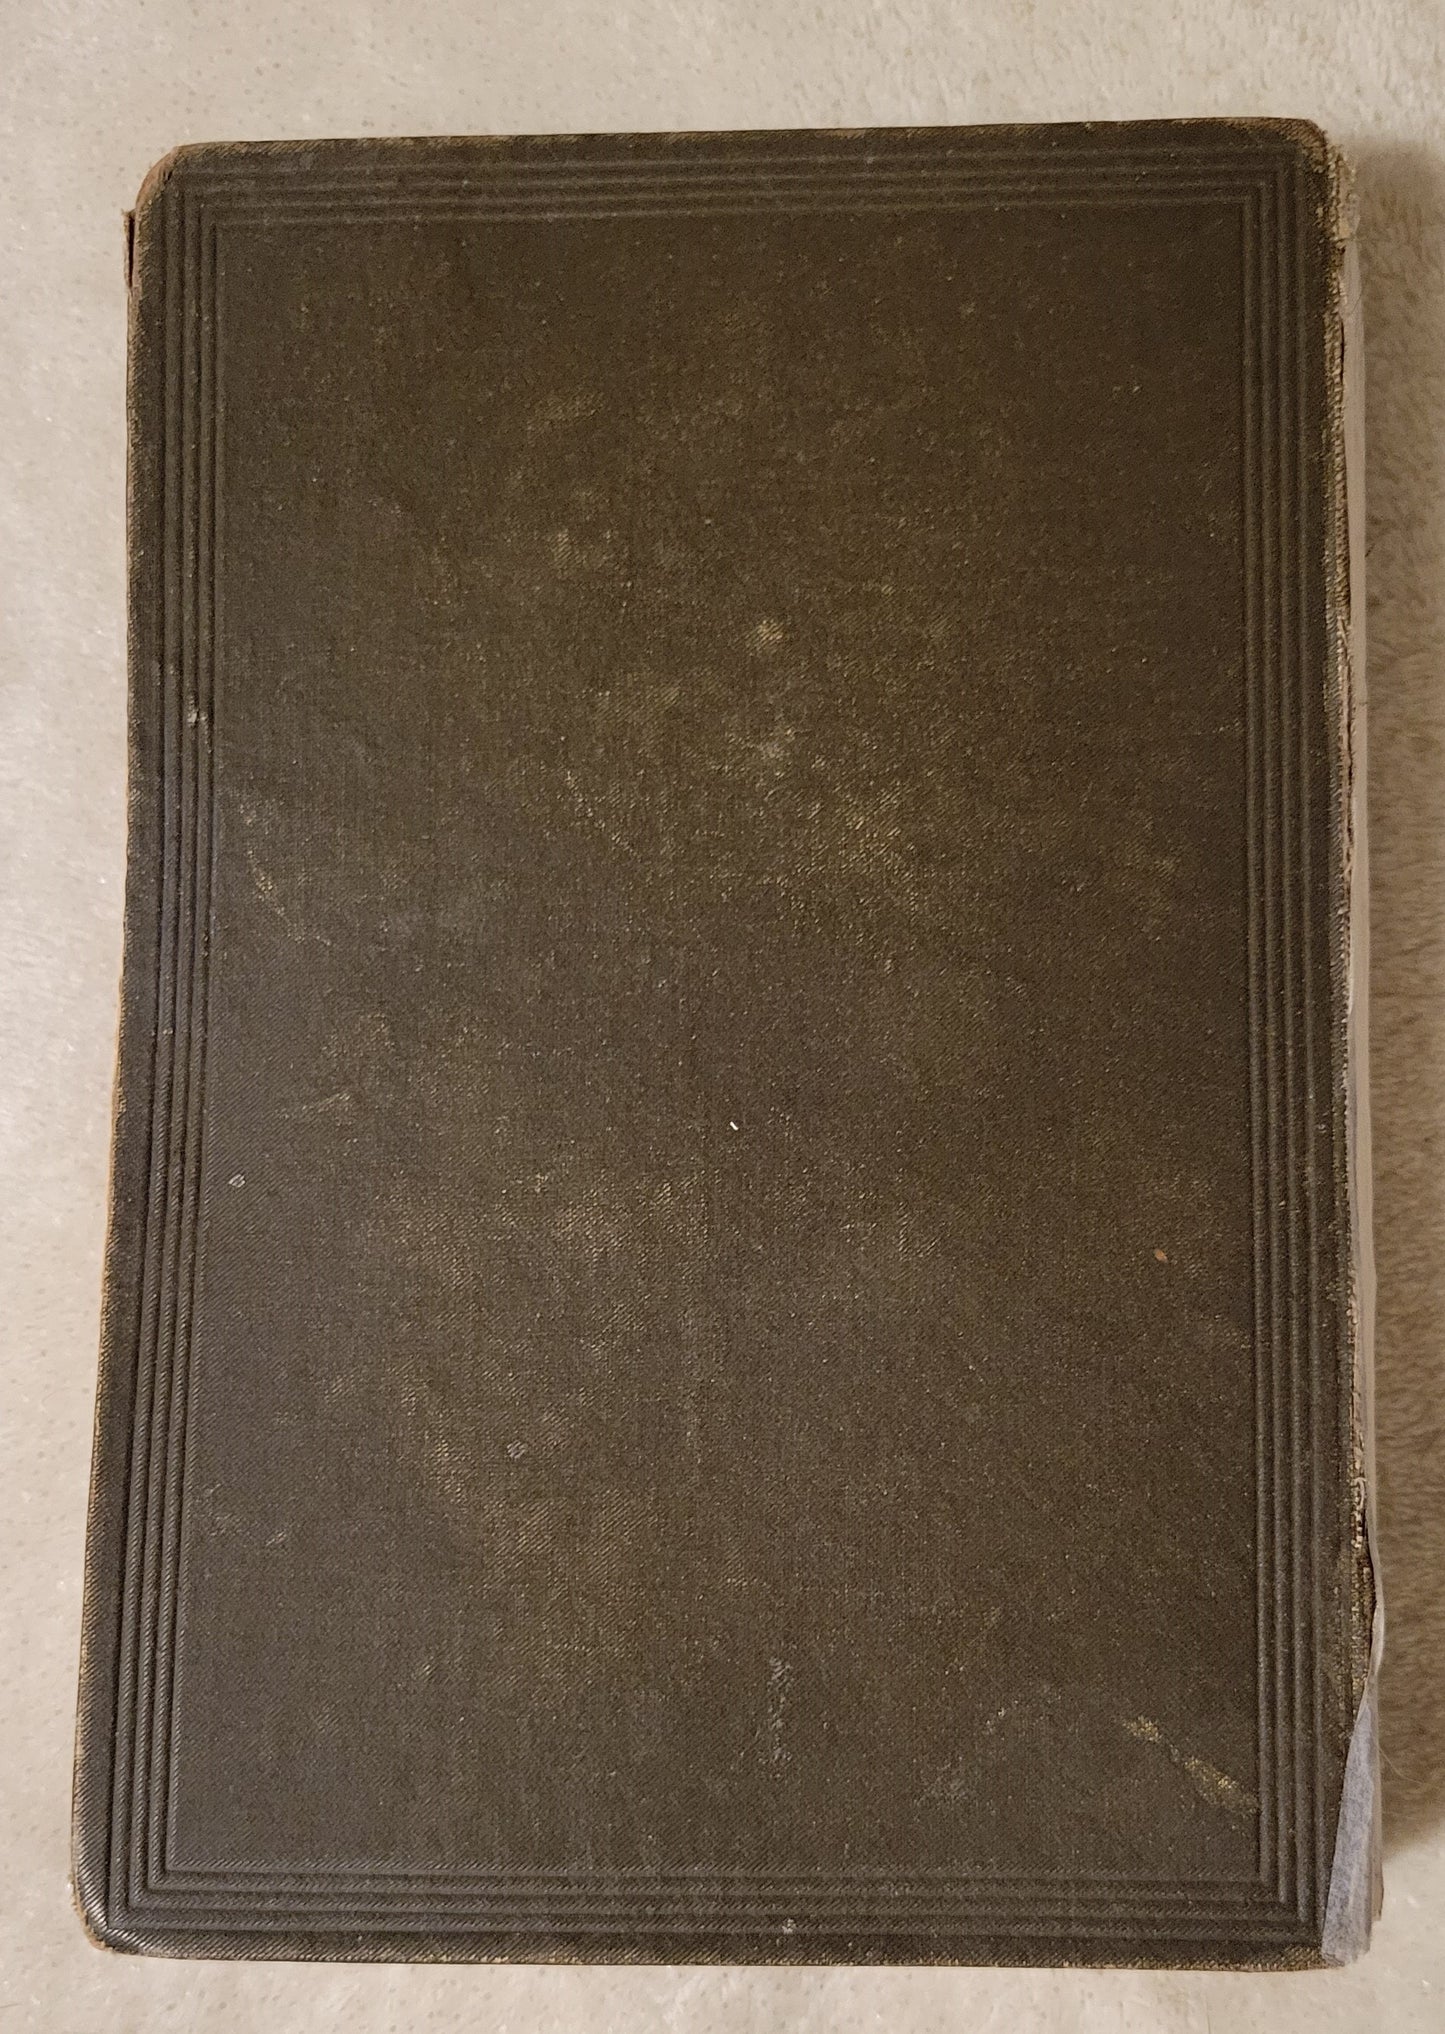 Antique book for sale, "The New Testament of the Our Lord and Saviour Jesus Christ", Oxford University Press, 1881. View of back cover.